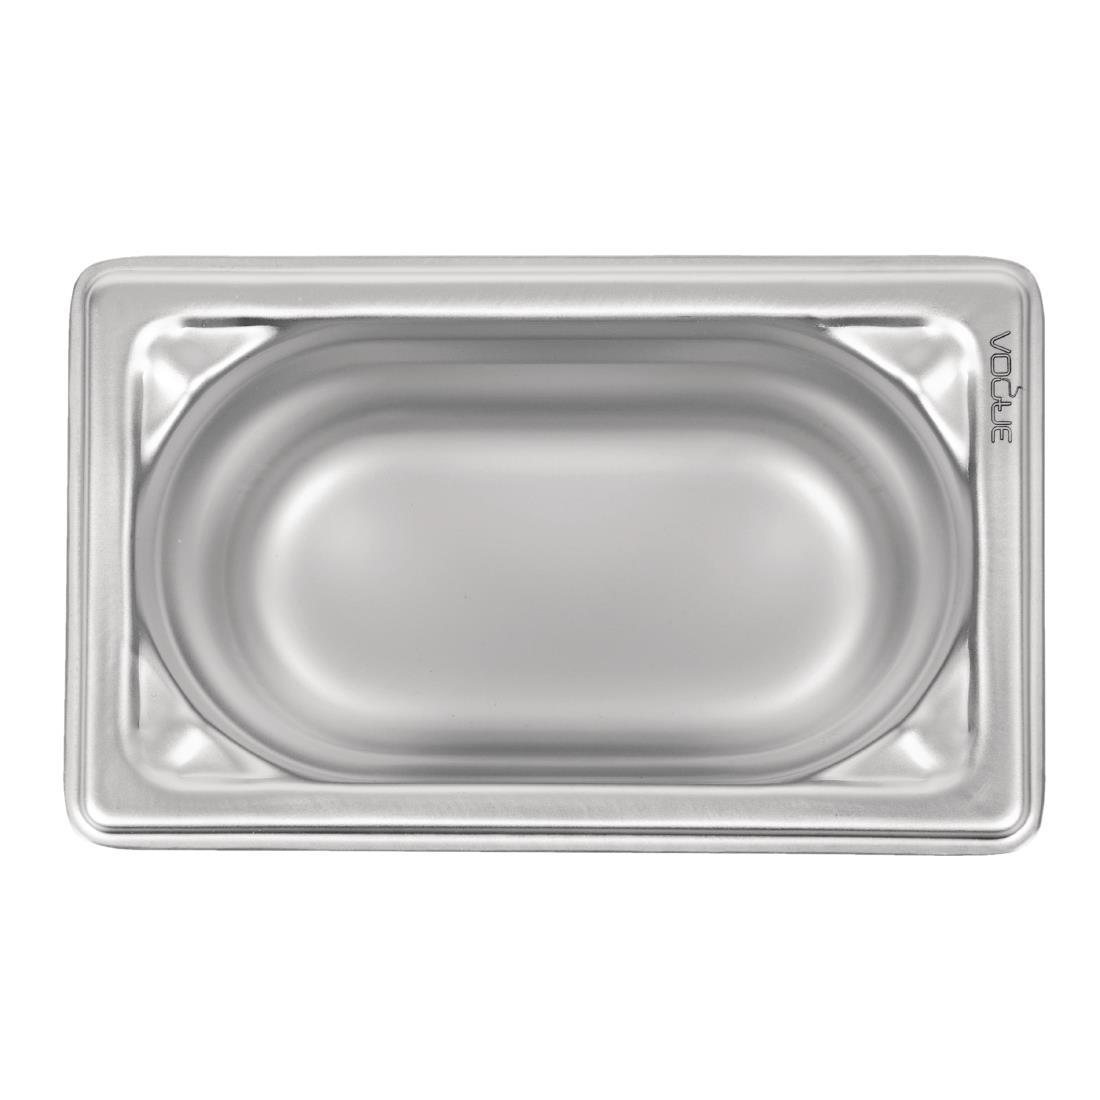 Vogue Heavy Duty Stainless Steel 1/9 Gastronorm Pan 100mm - DW454  - 4